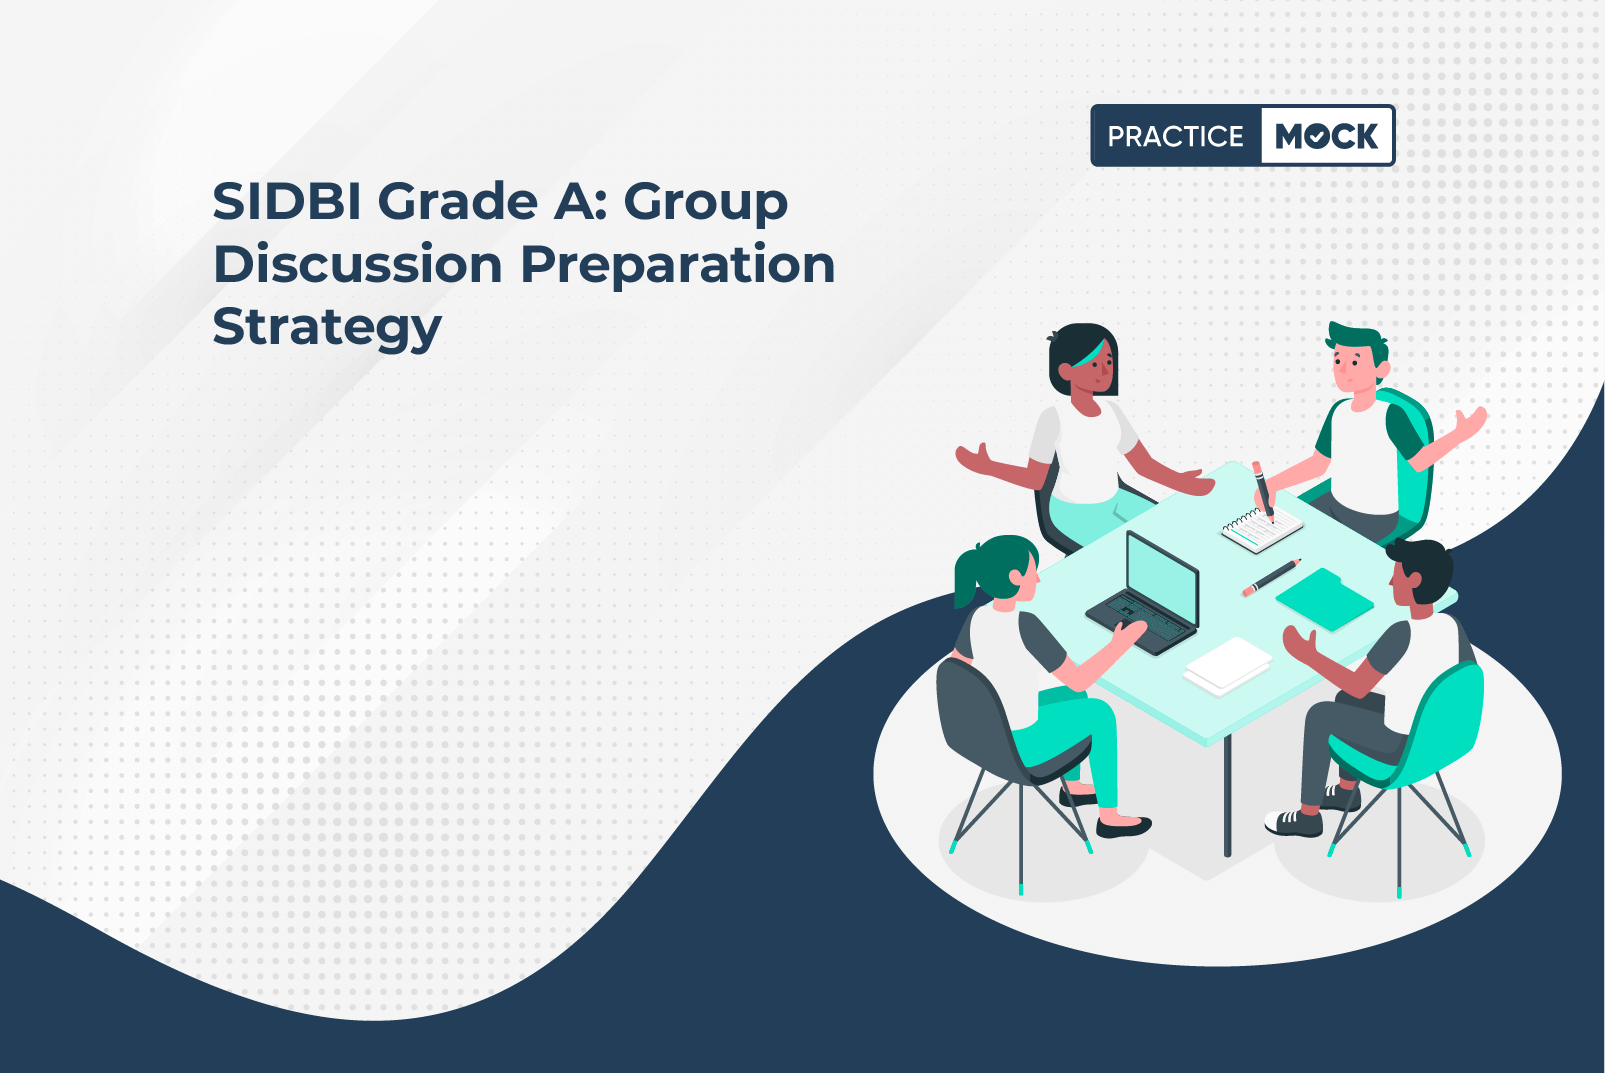 SIDBI Grade A Group Discussion Preparation Strategy